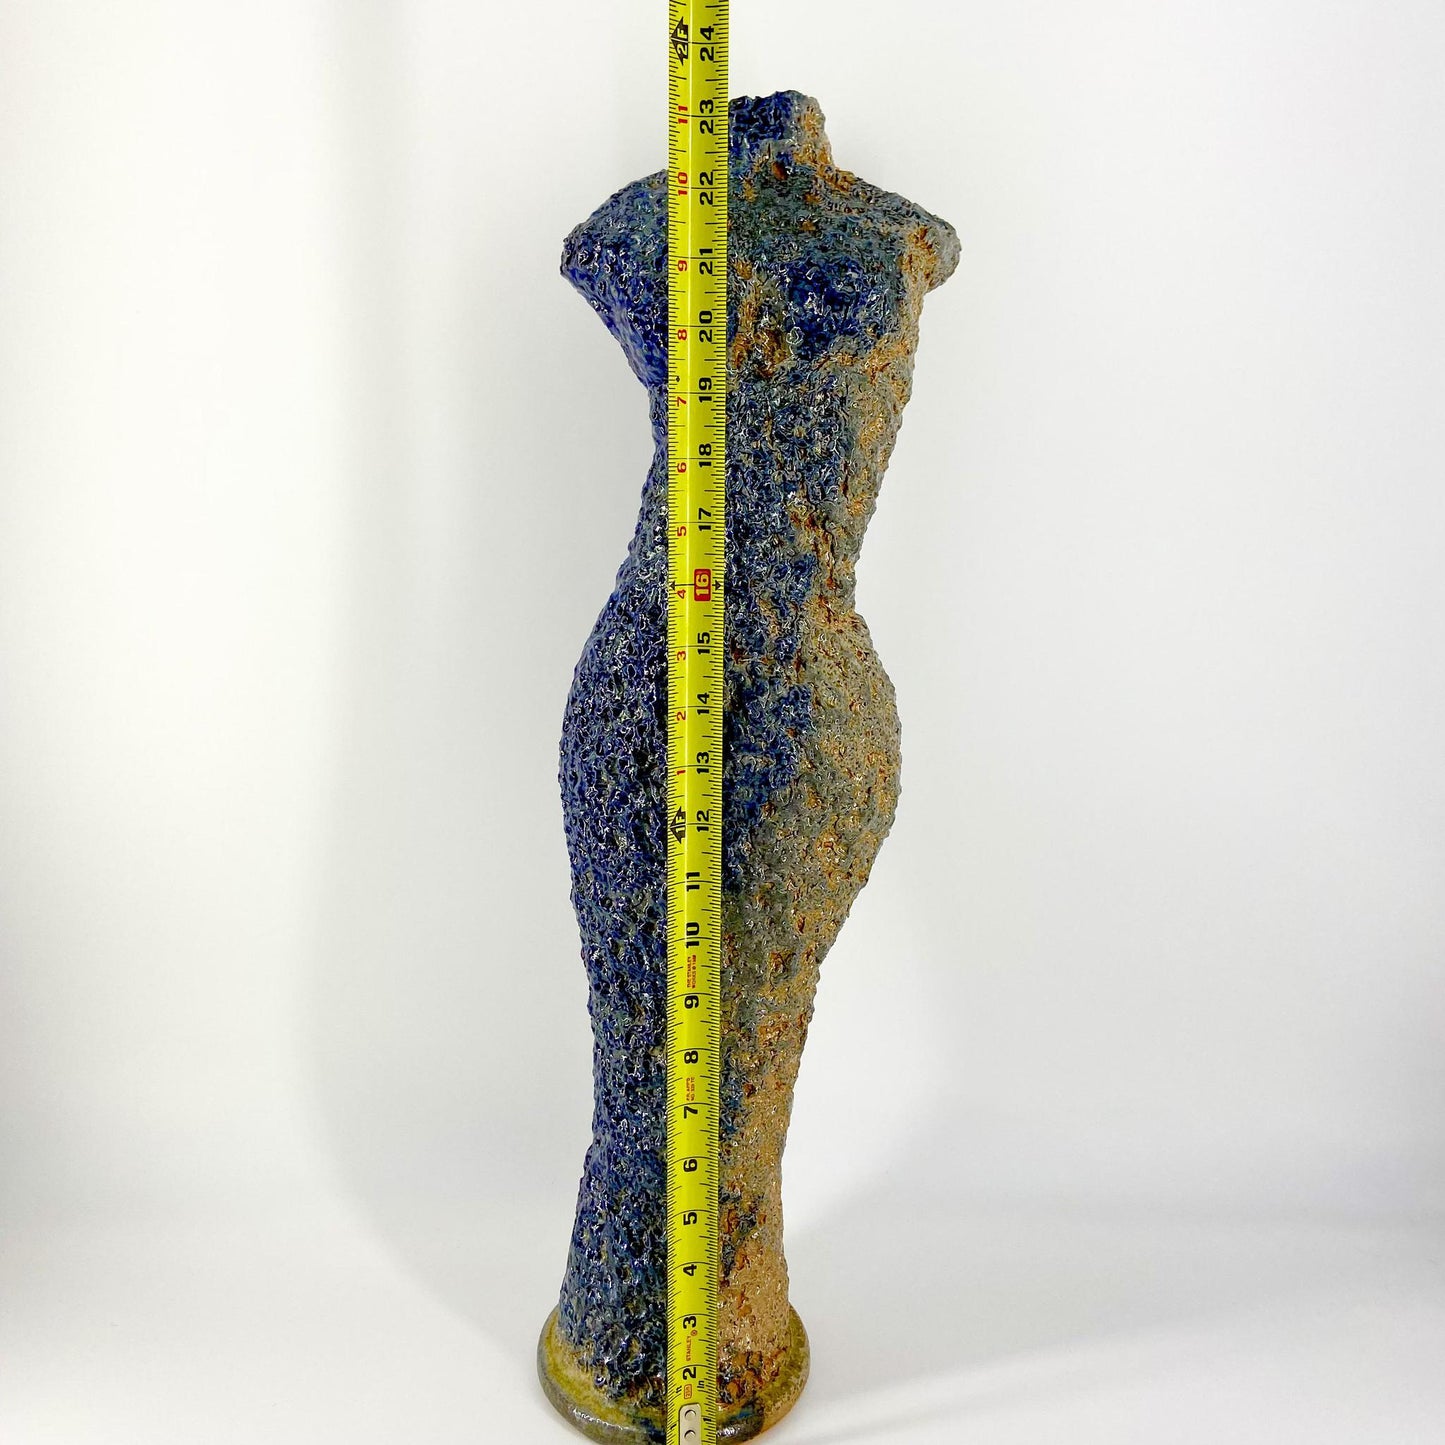 Sculpture - Large Female Form in Ceramic - Wood Fired